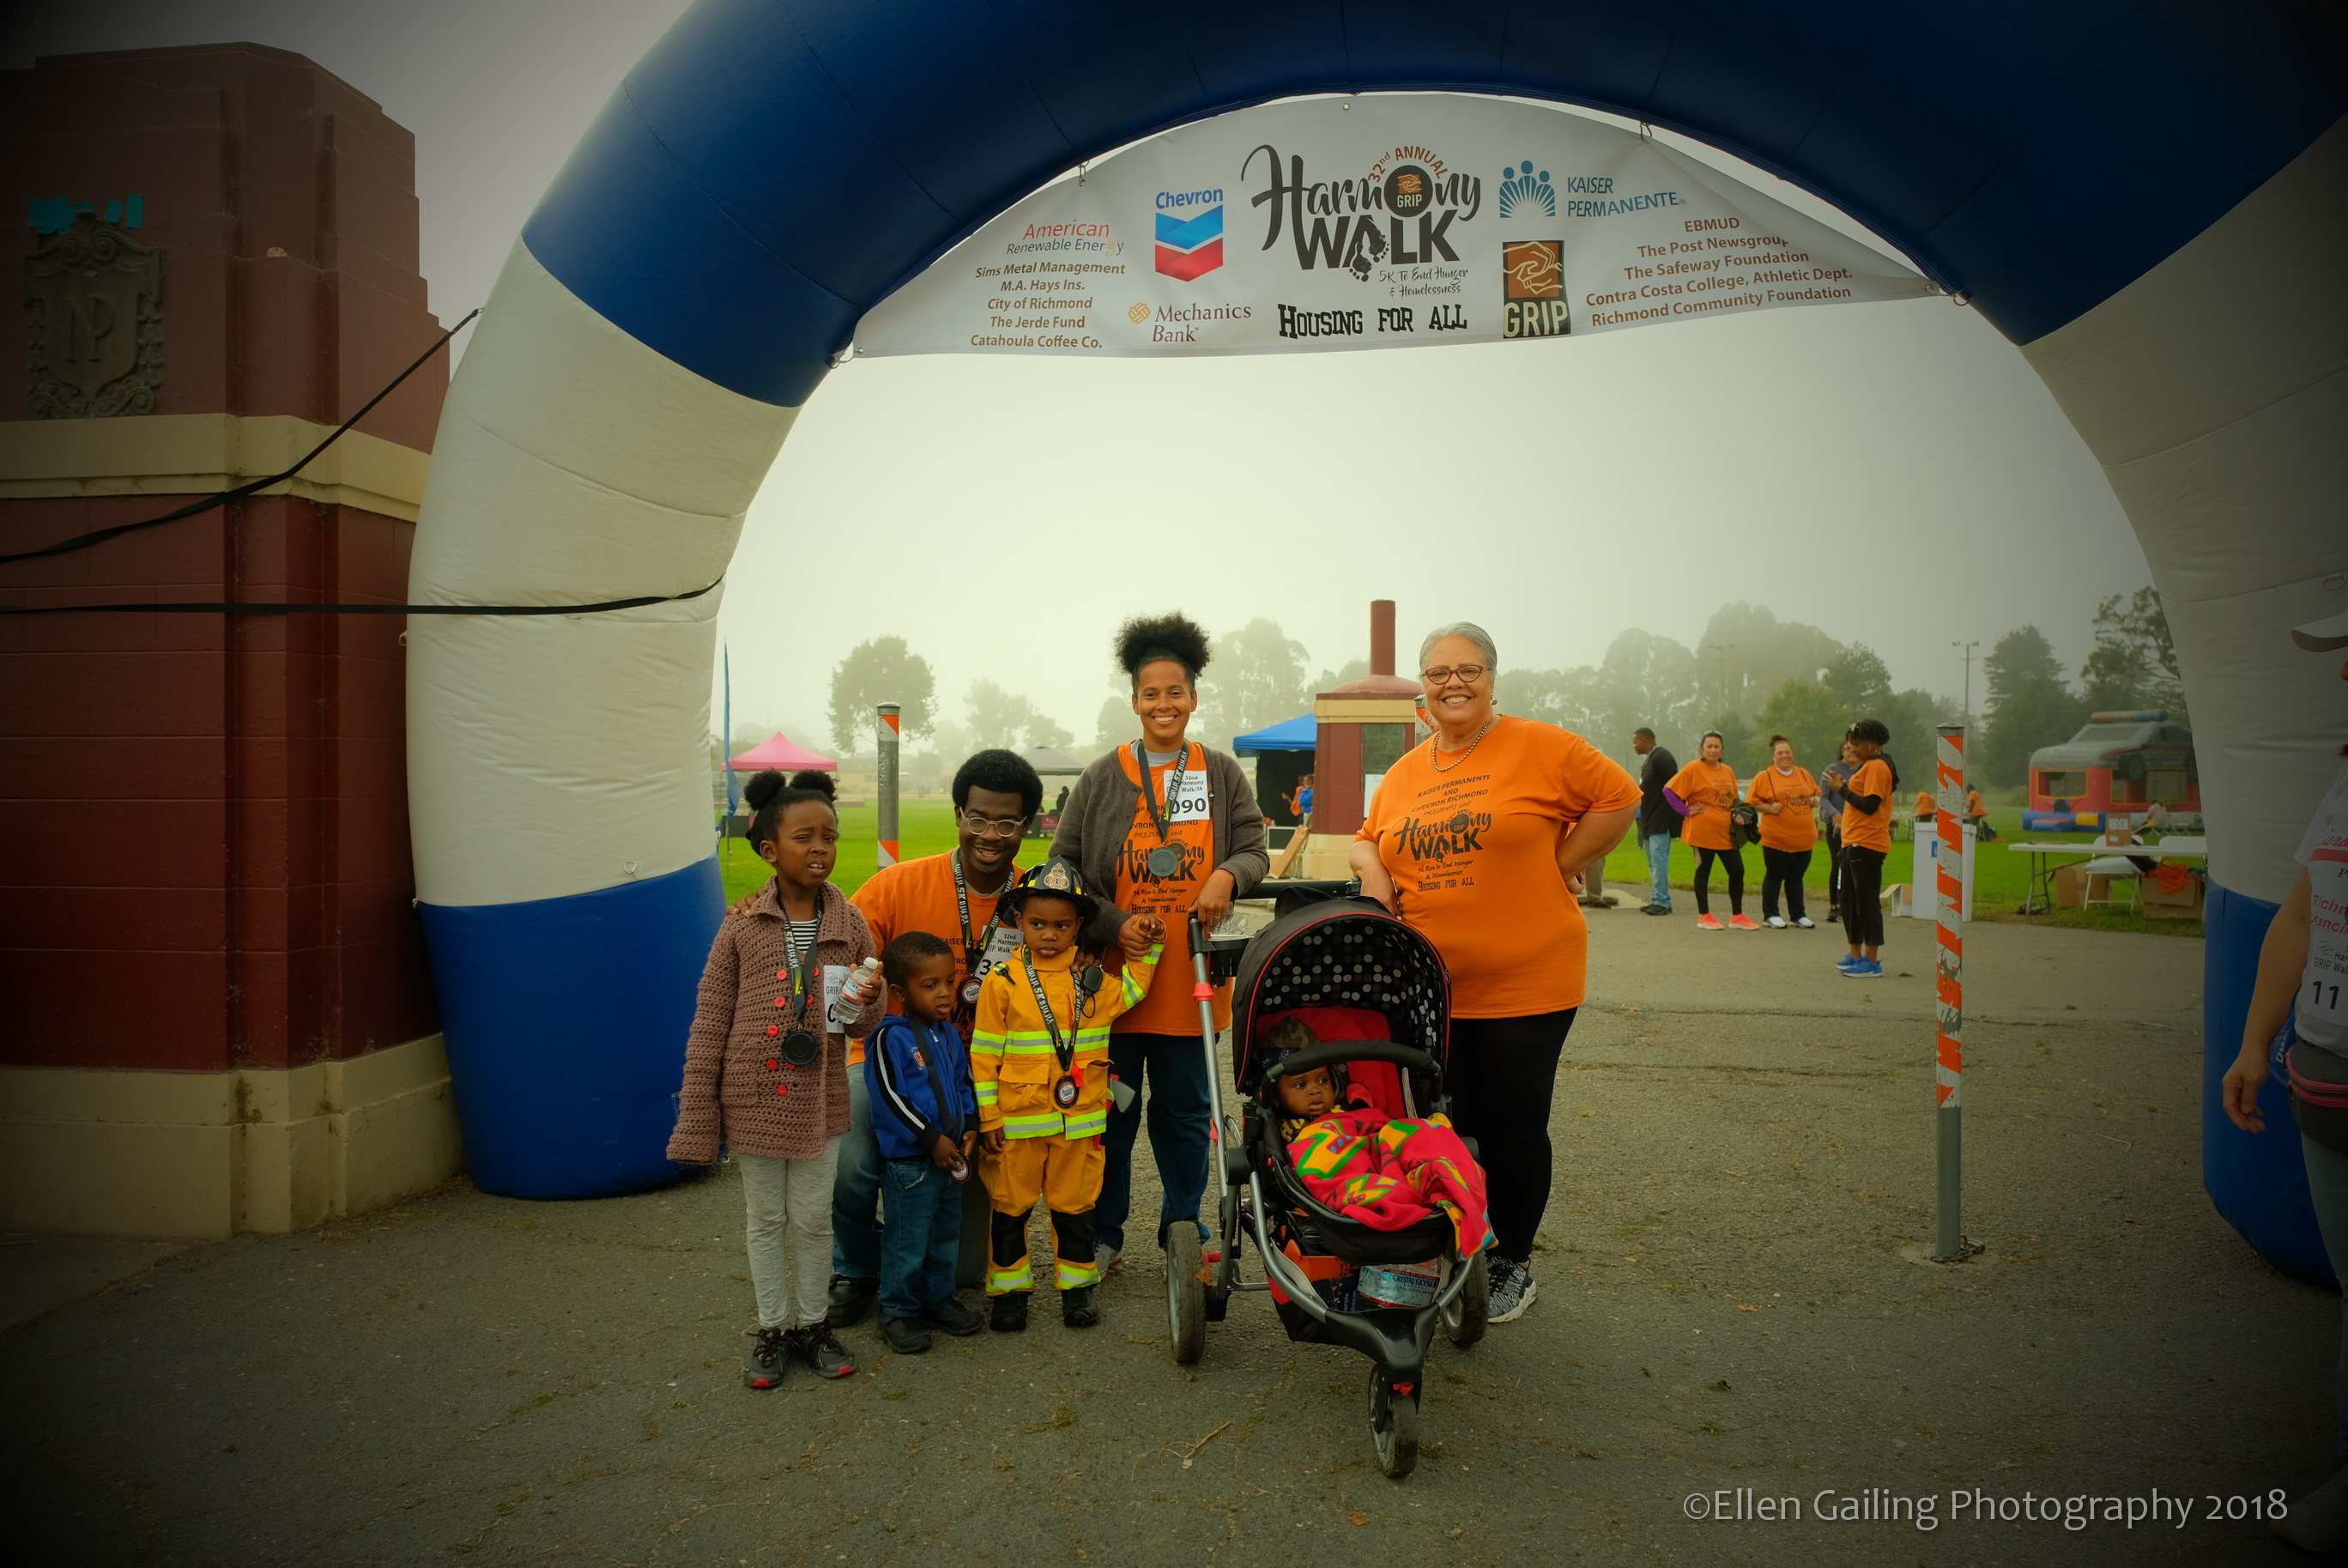 It’s Back in 2021: Announcing the 35th Annual GRIP Harmony Walk!